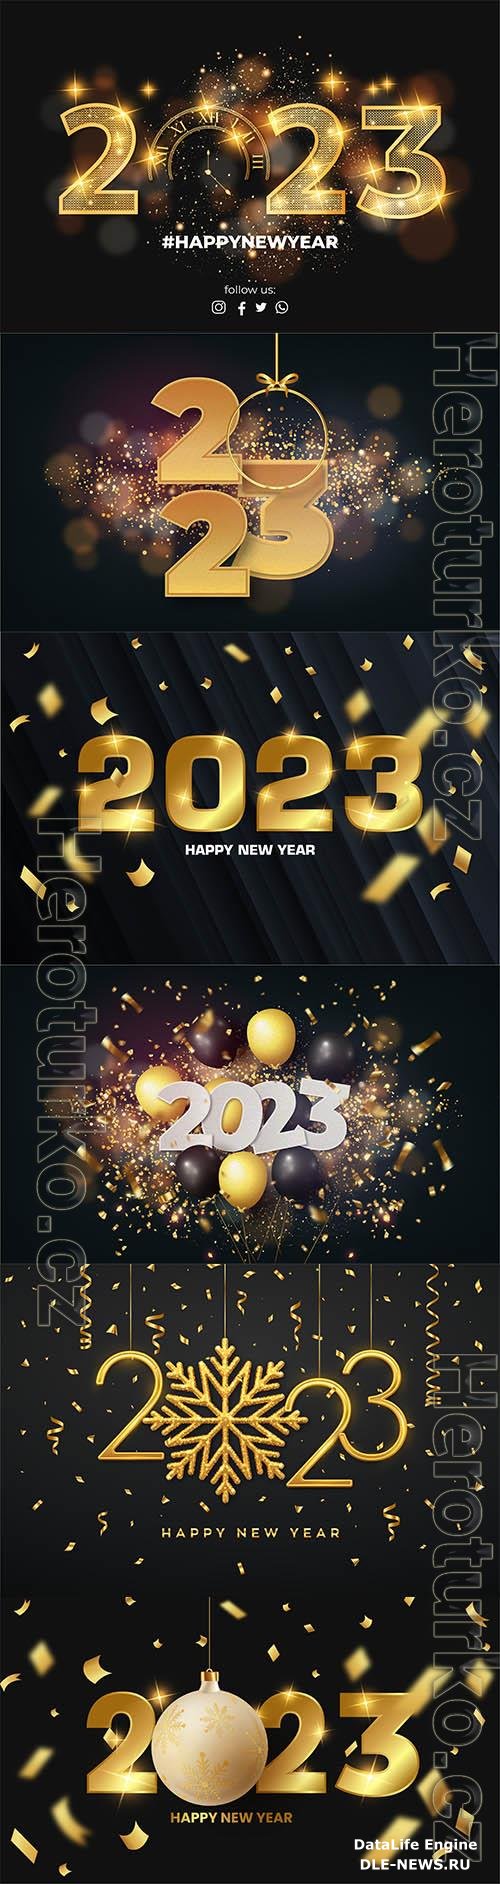 Happy new year black vector background with golden style